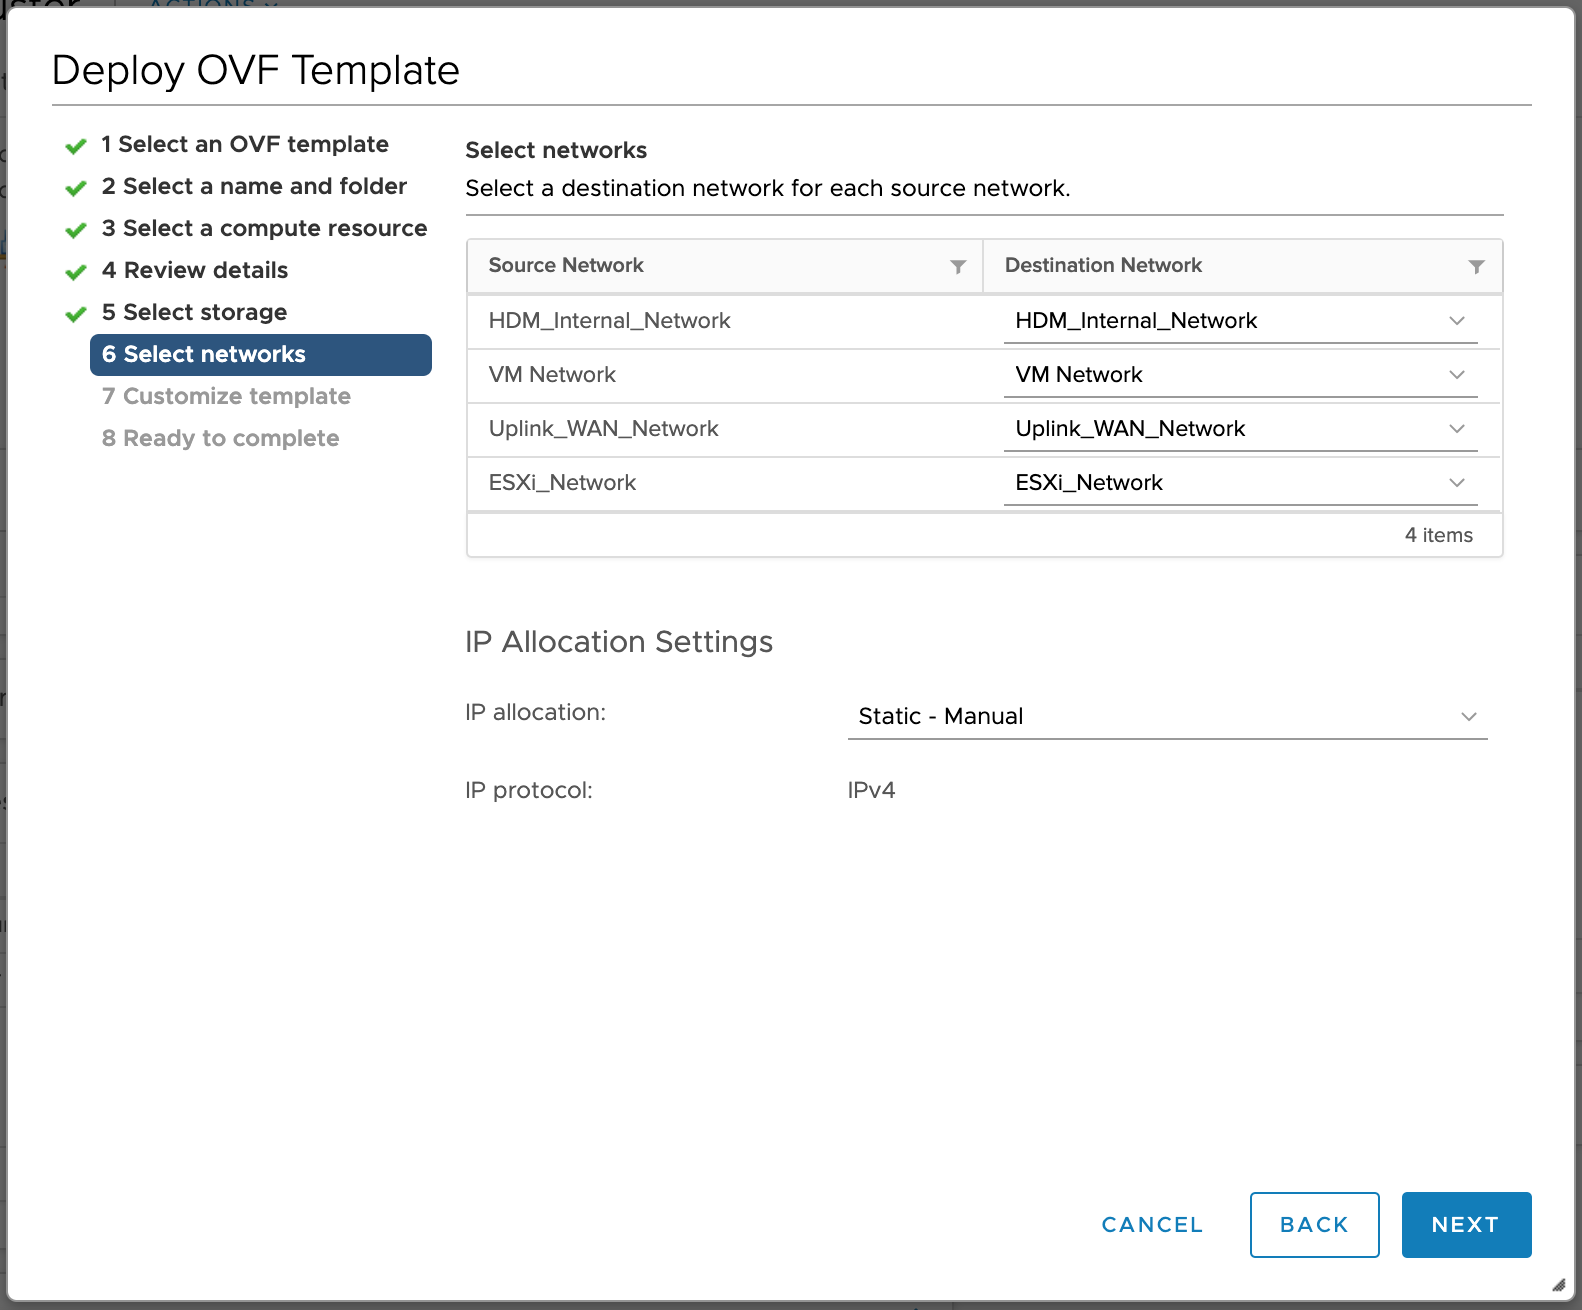 Deploy OVD Template Screen